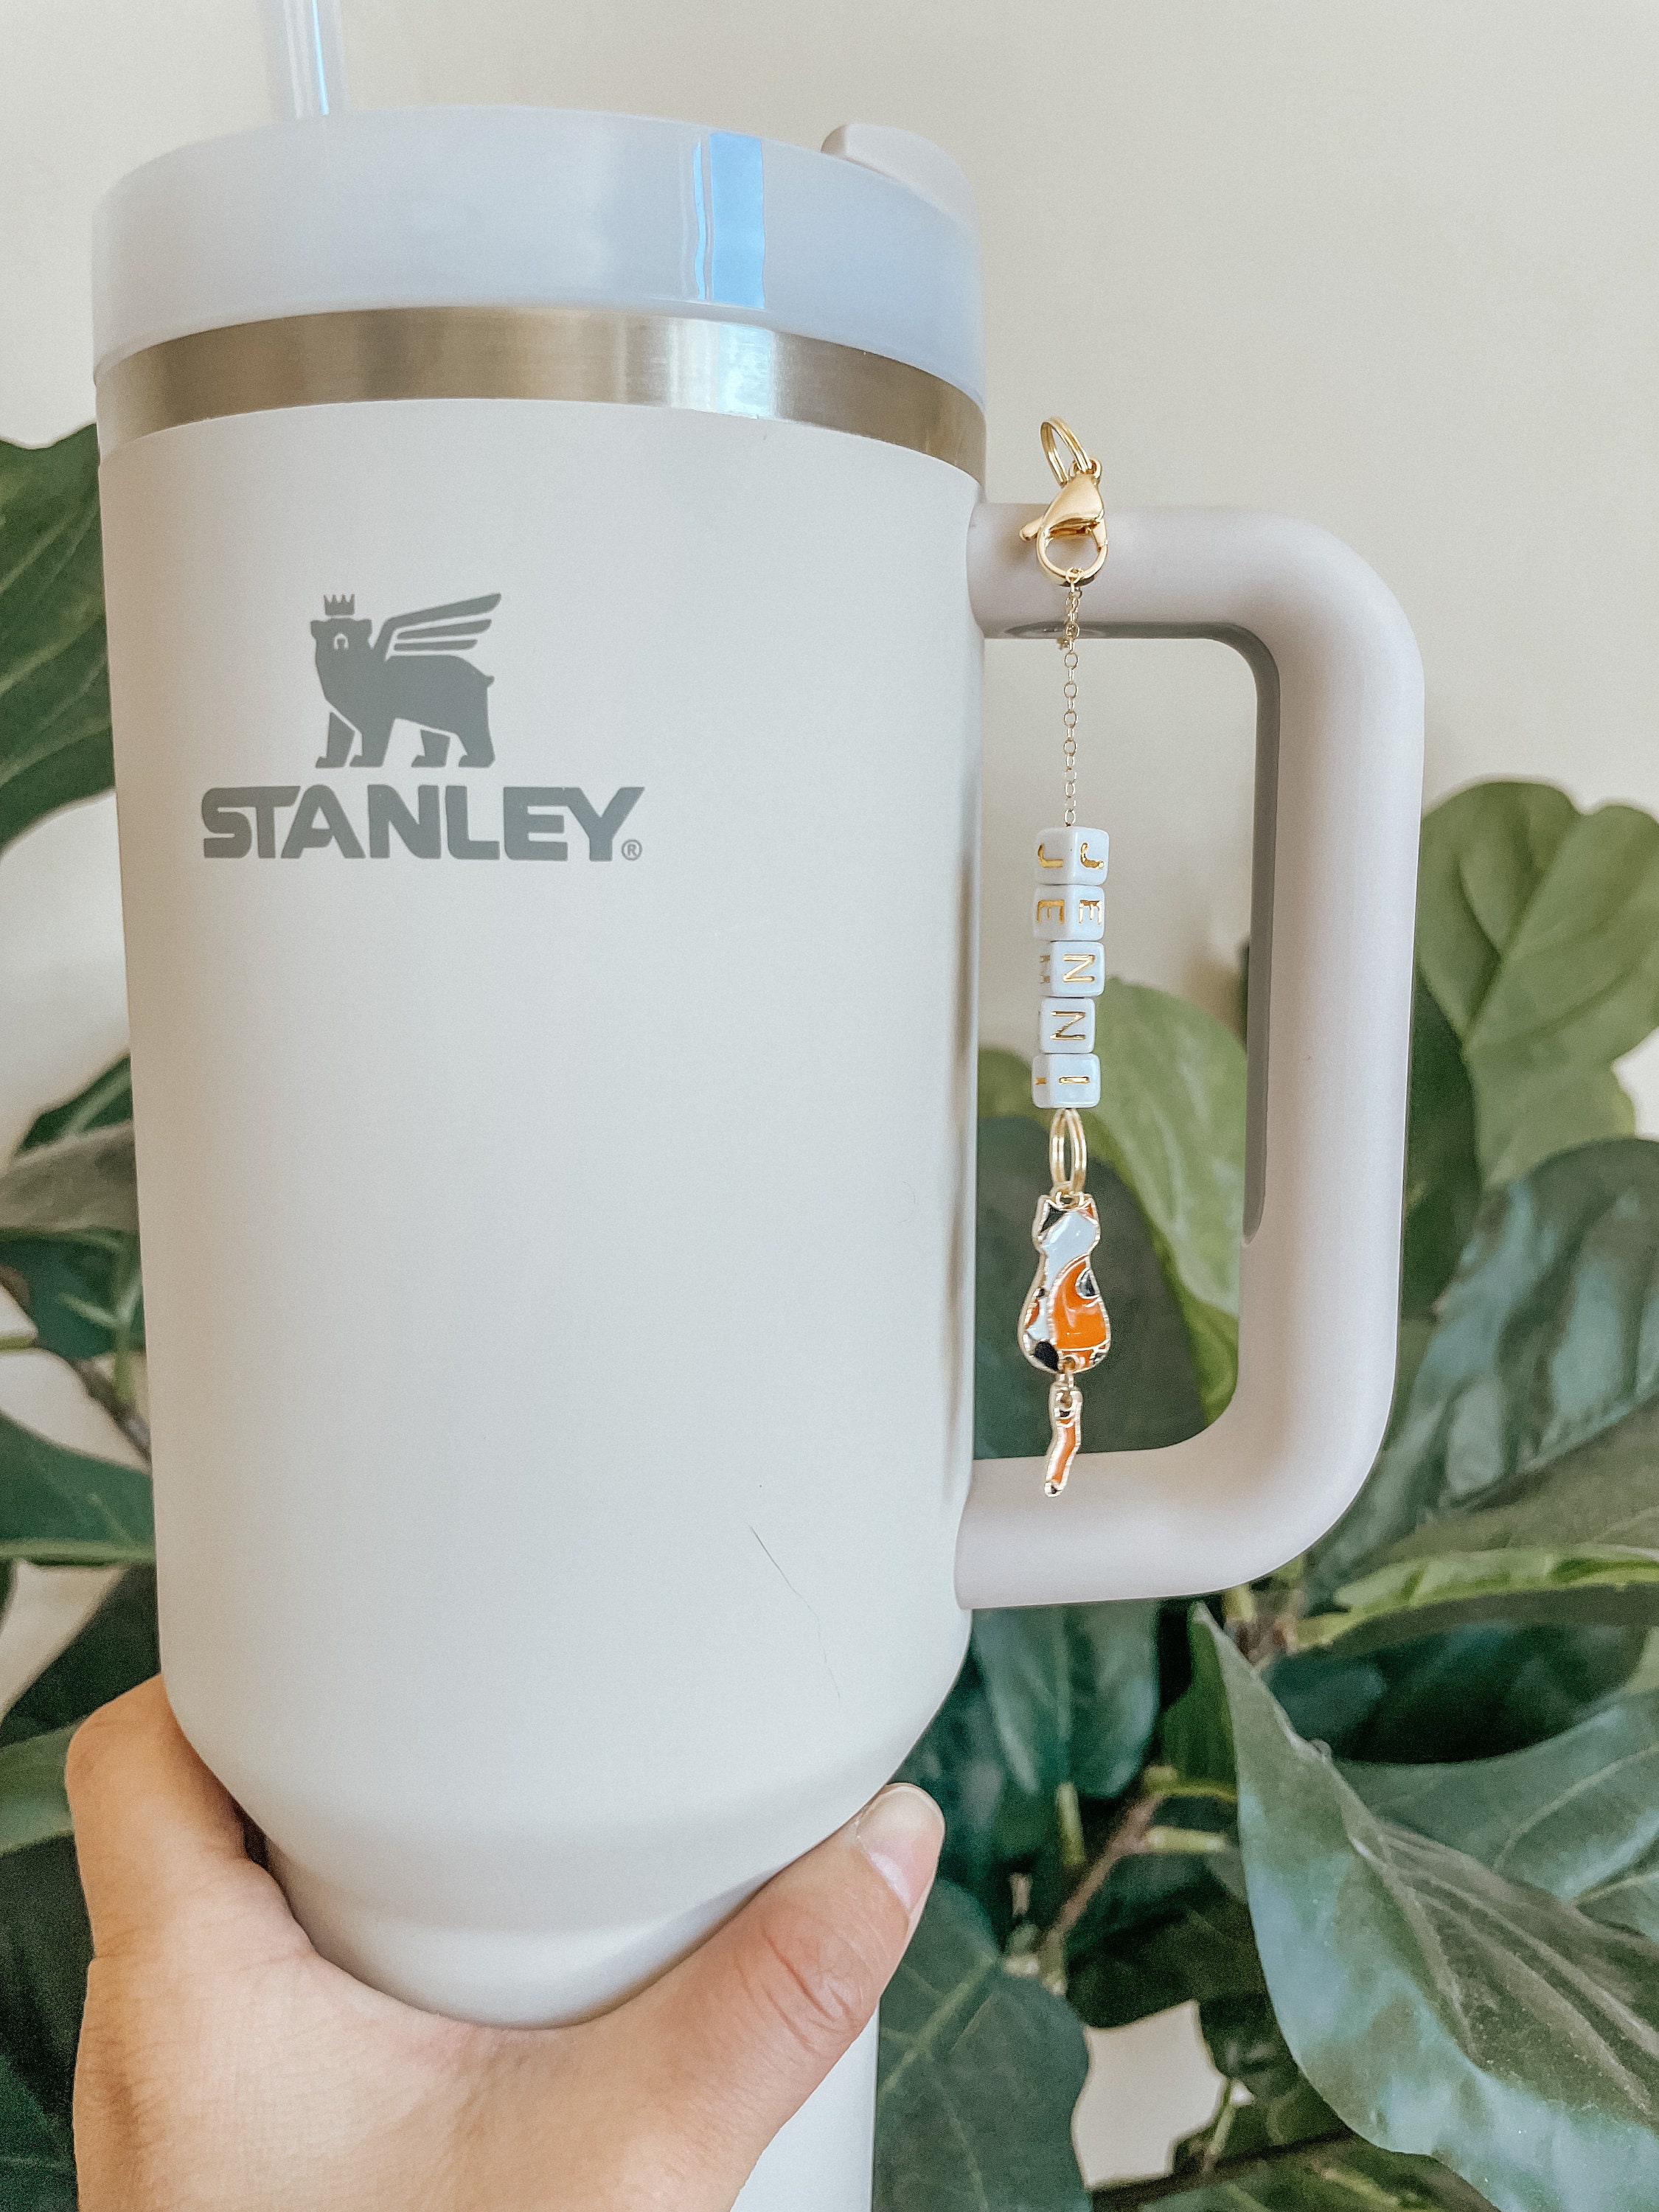 Stanley Tumbler Cup Charm Accessories for Water Bottle Stanley Cup Tumbler  Handle Charm Stanley Accessories Gift for Dentist Tooth Charm -  Finland